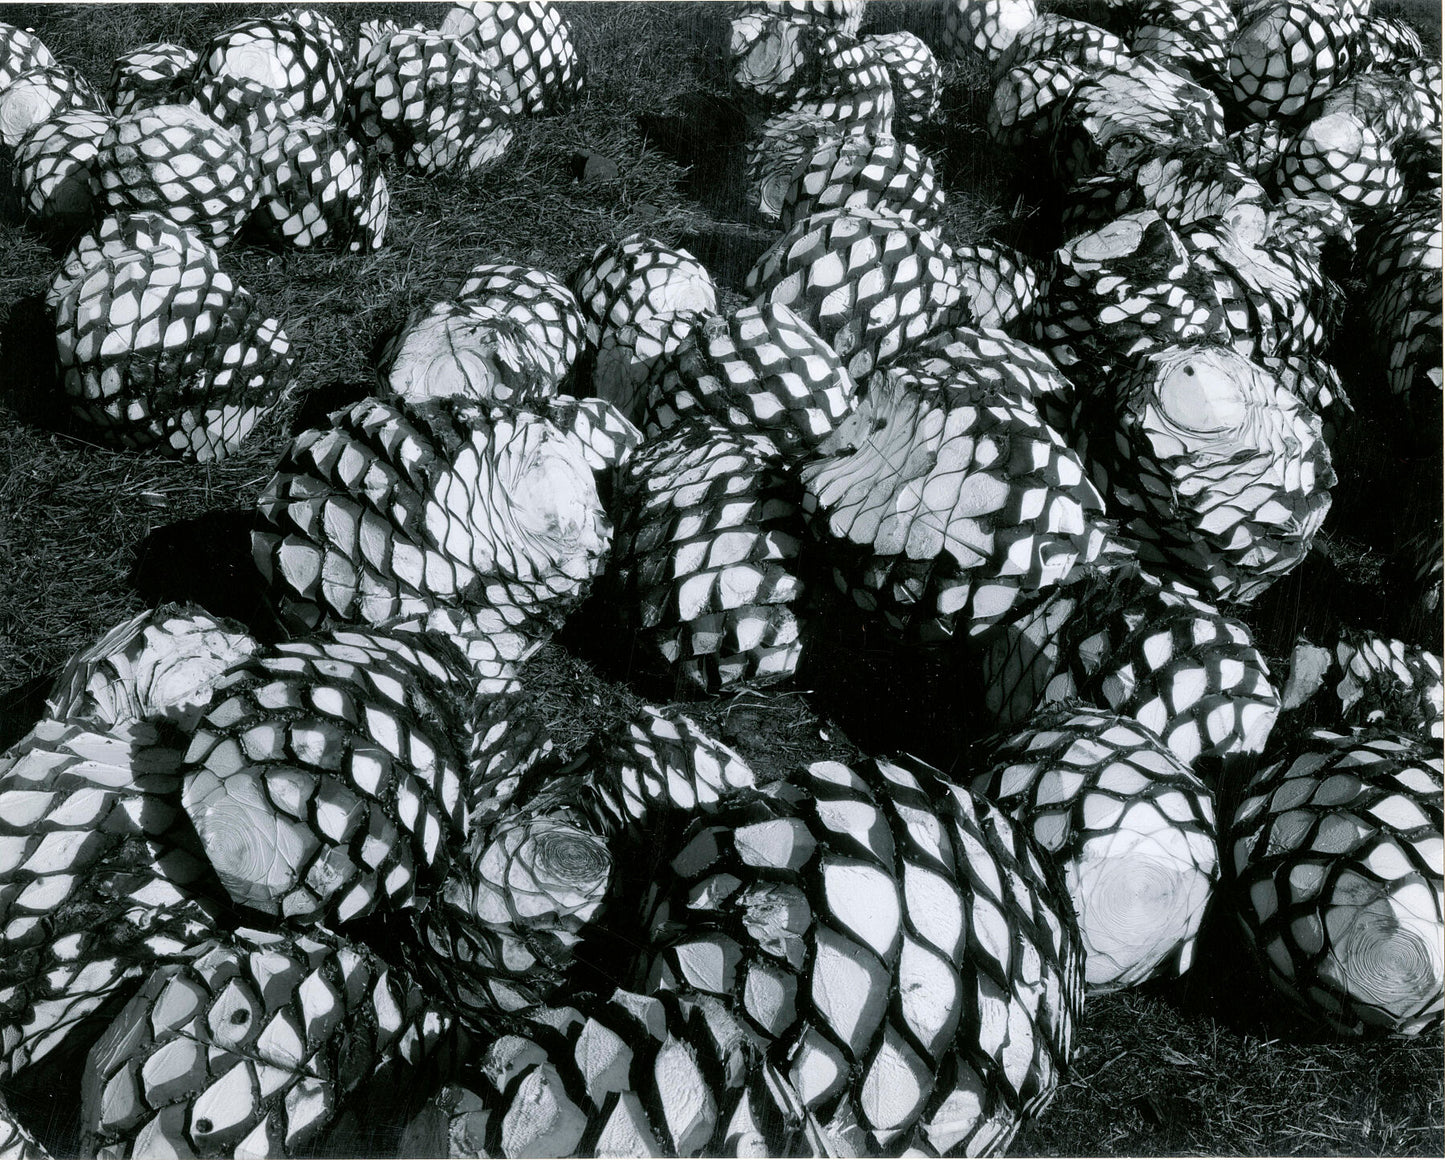 An unframed black and white print titled ‘Palm Cores Mexico’ by Brett Weston: A captivating photograph capturing the optical illusions formed by scattered palm cores in Mexico